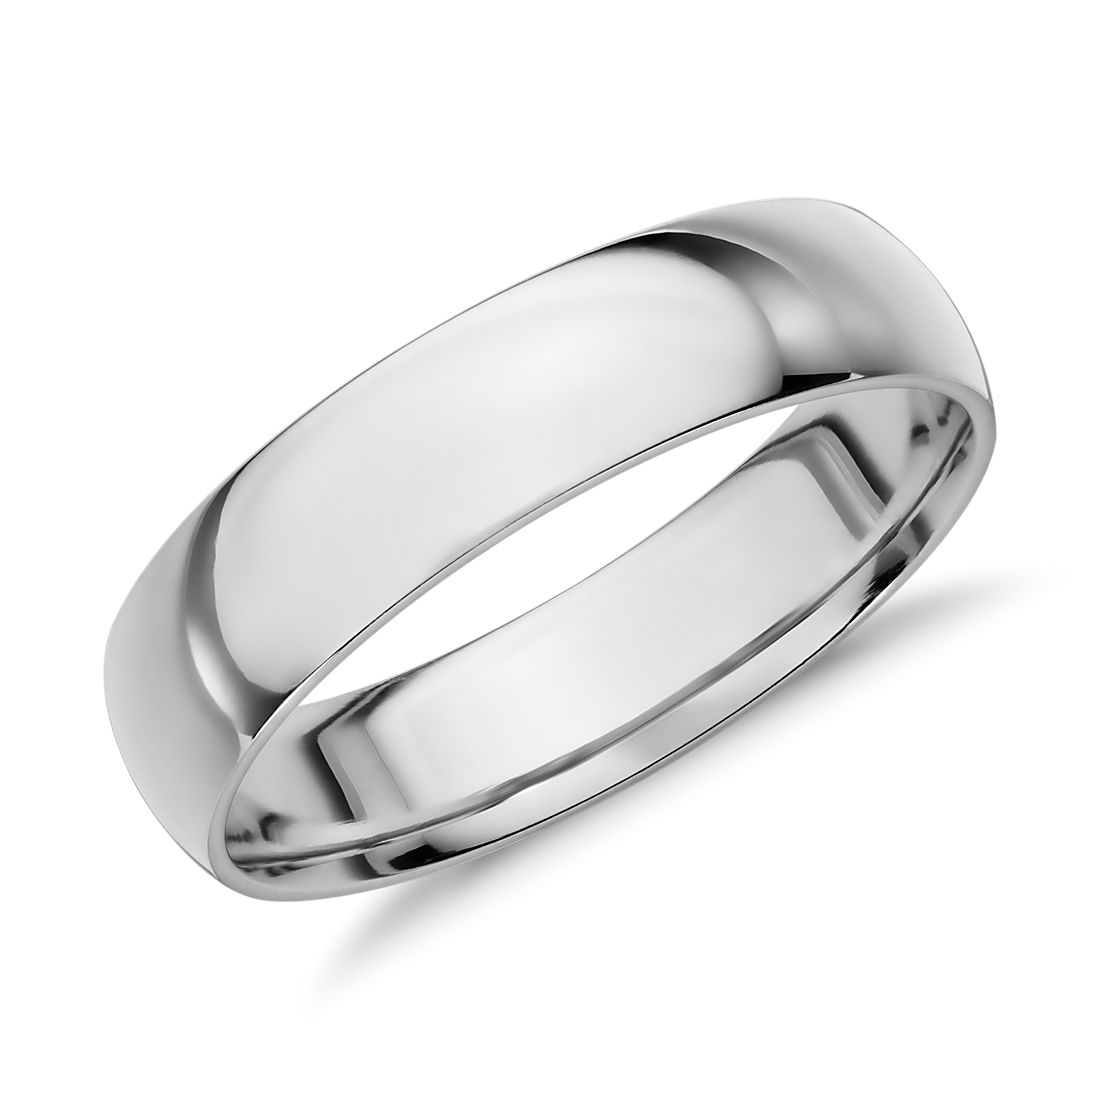 Solid 14K White Gold 5 MM Size 11 Wedding Ring Band Mens Womens 